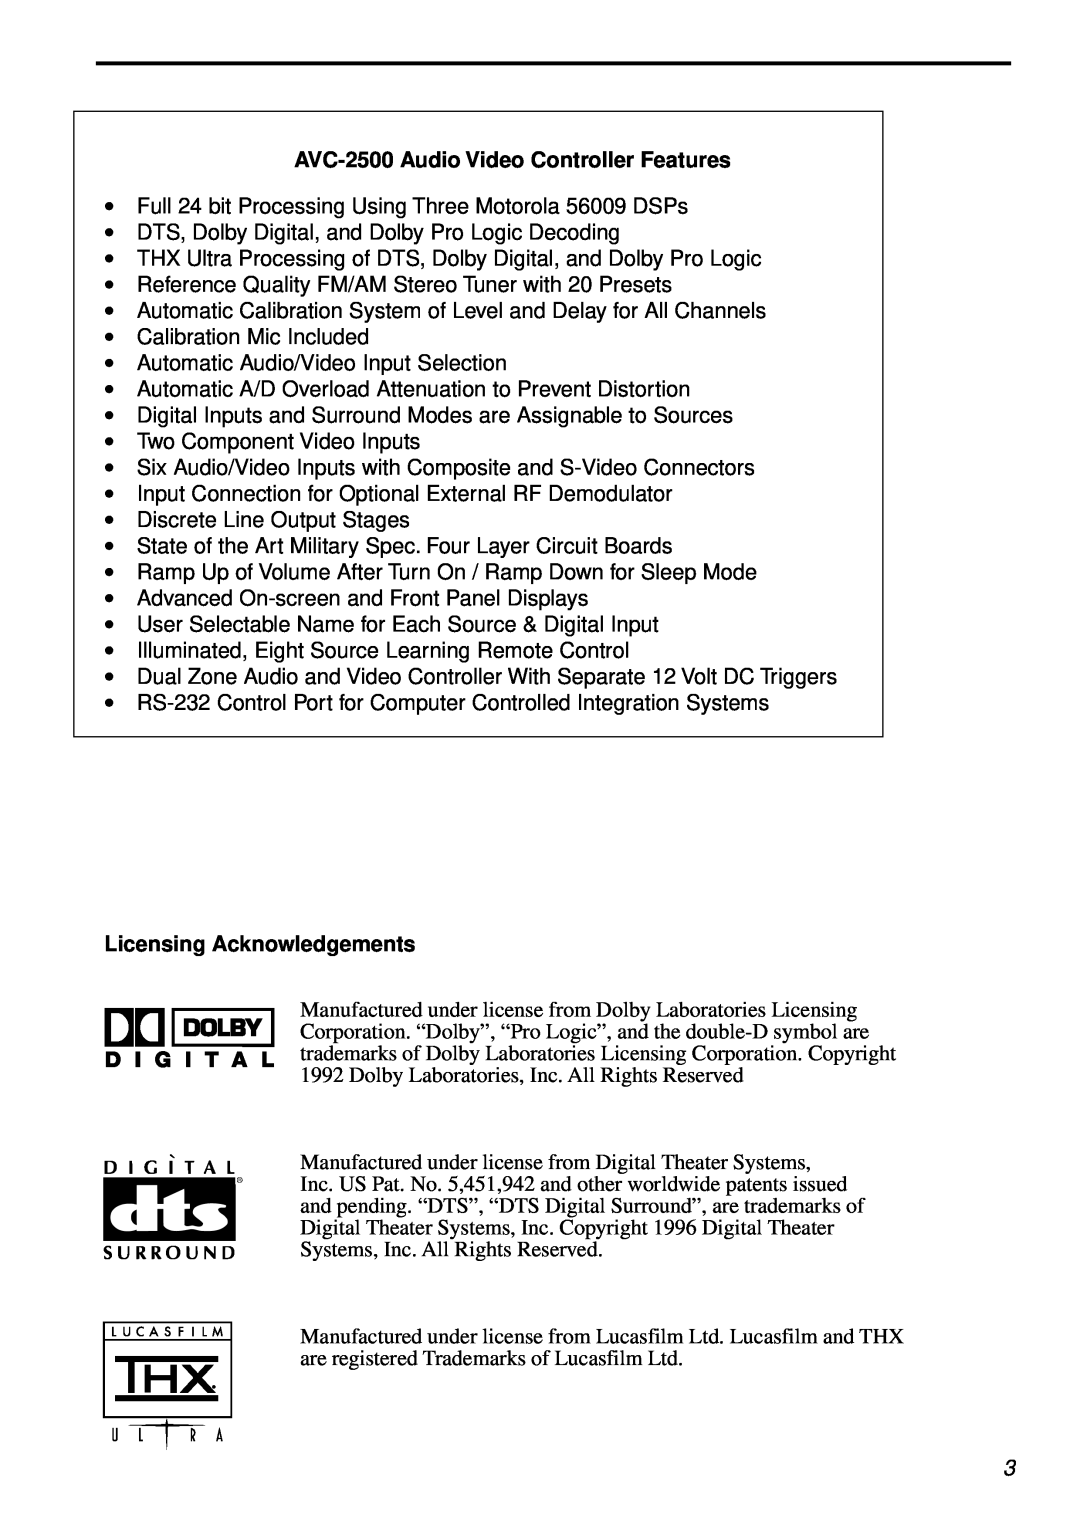 Parasound owner manual AVC-2500Audio Video Controller Features, Licensing Acknowledgements 